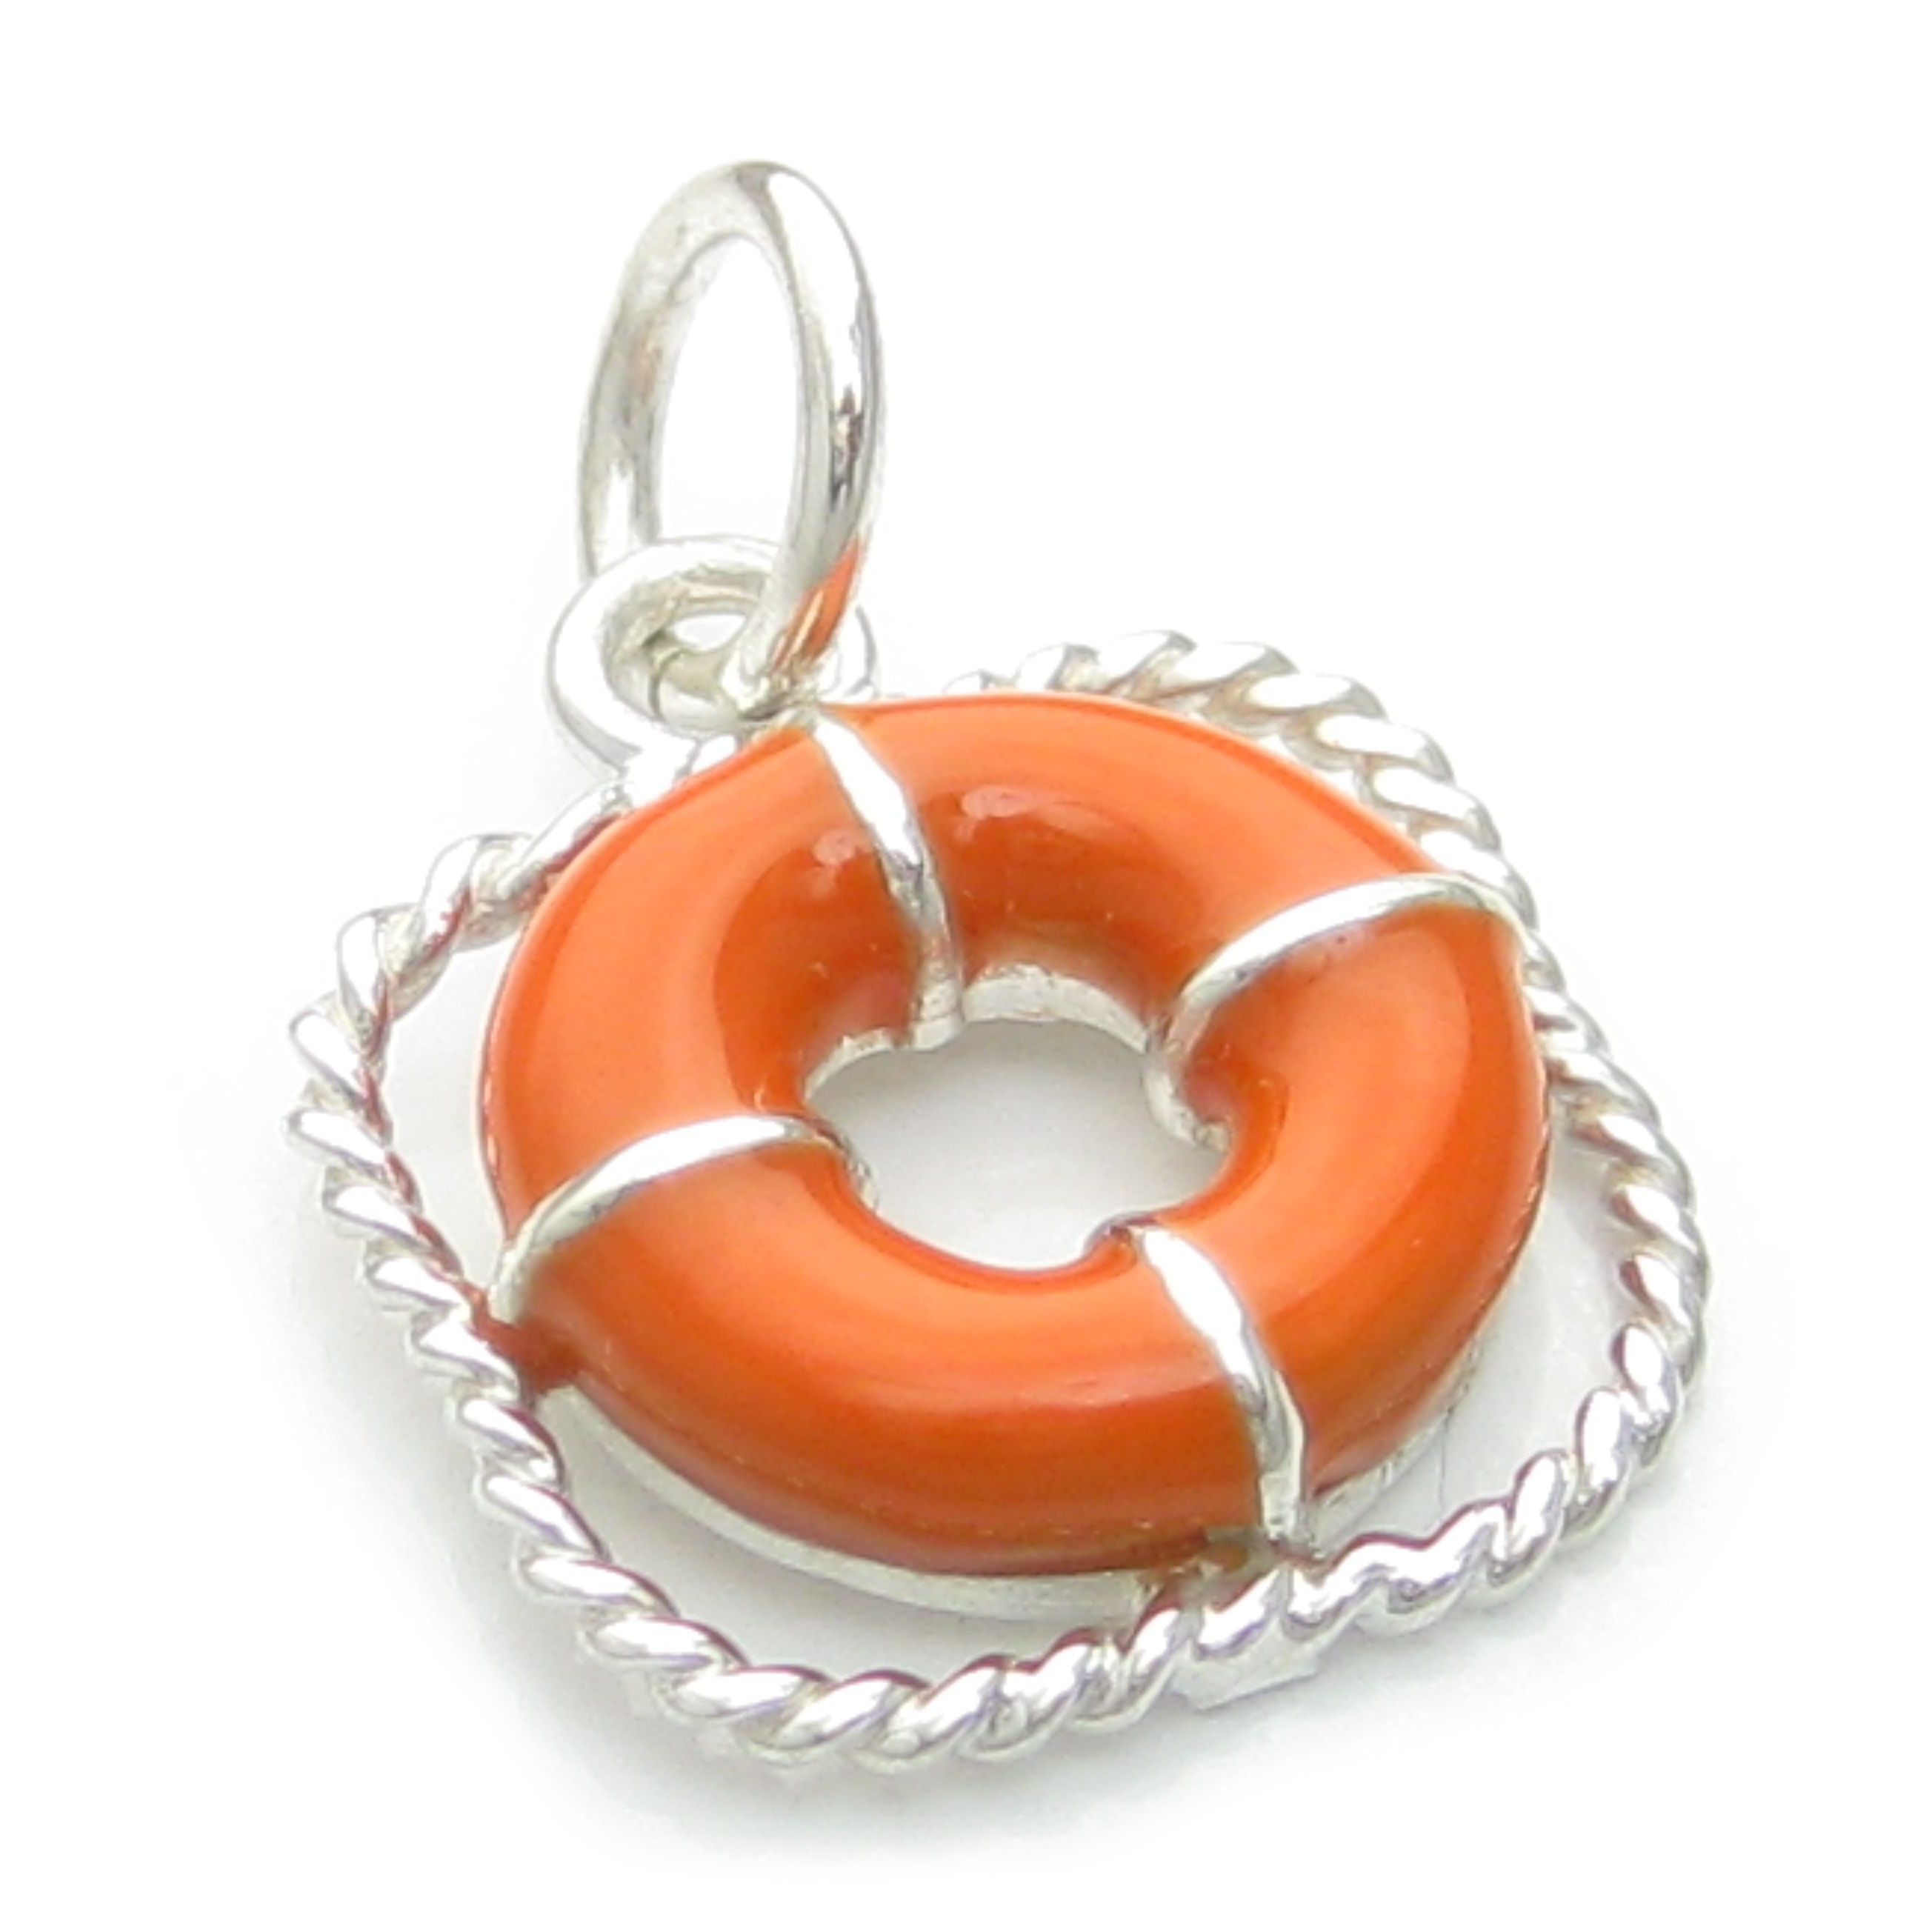 Life Buoy Preserver sterling silver charm .925x1 Boating Yachting charms